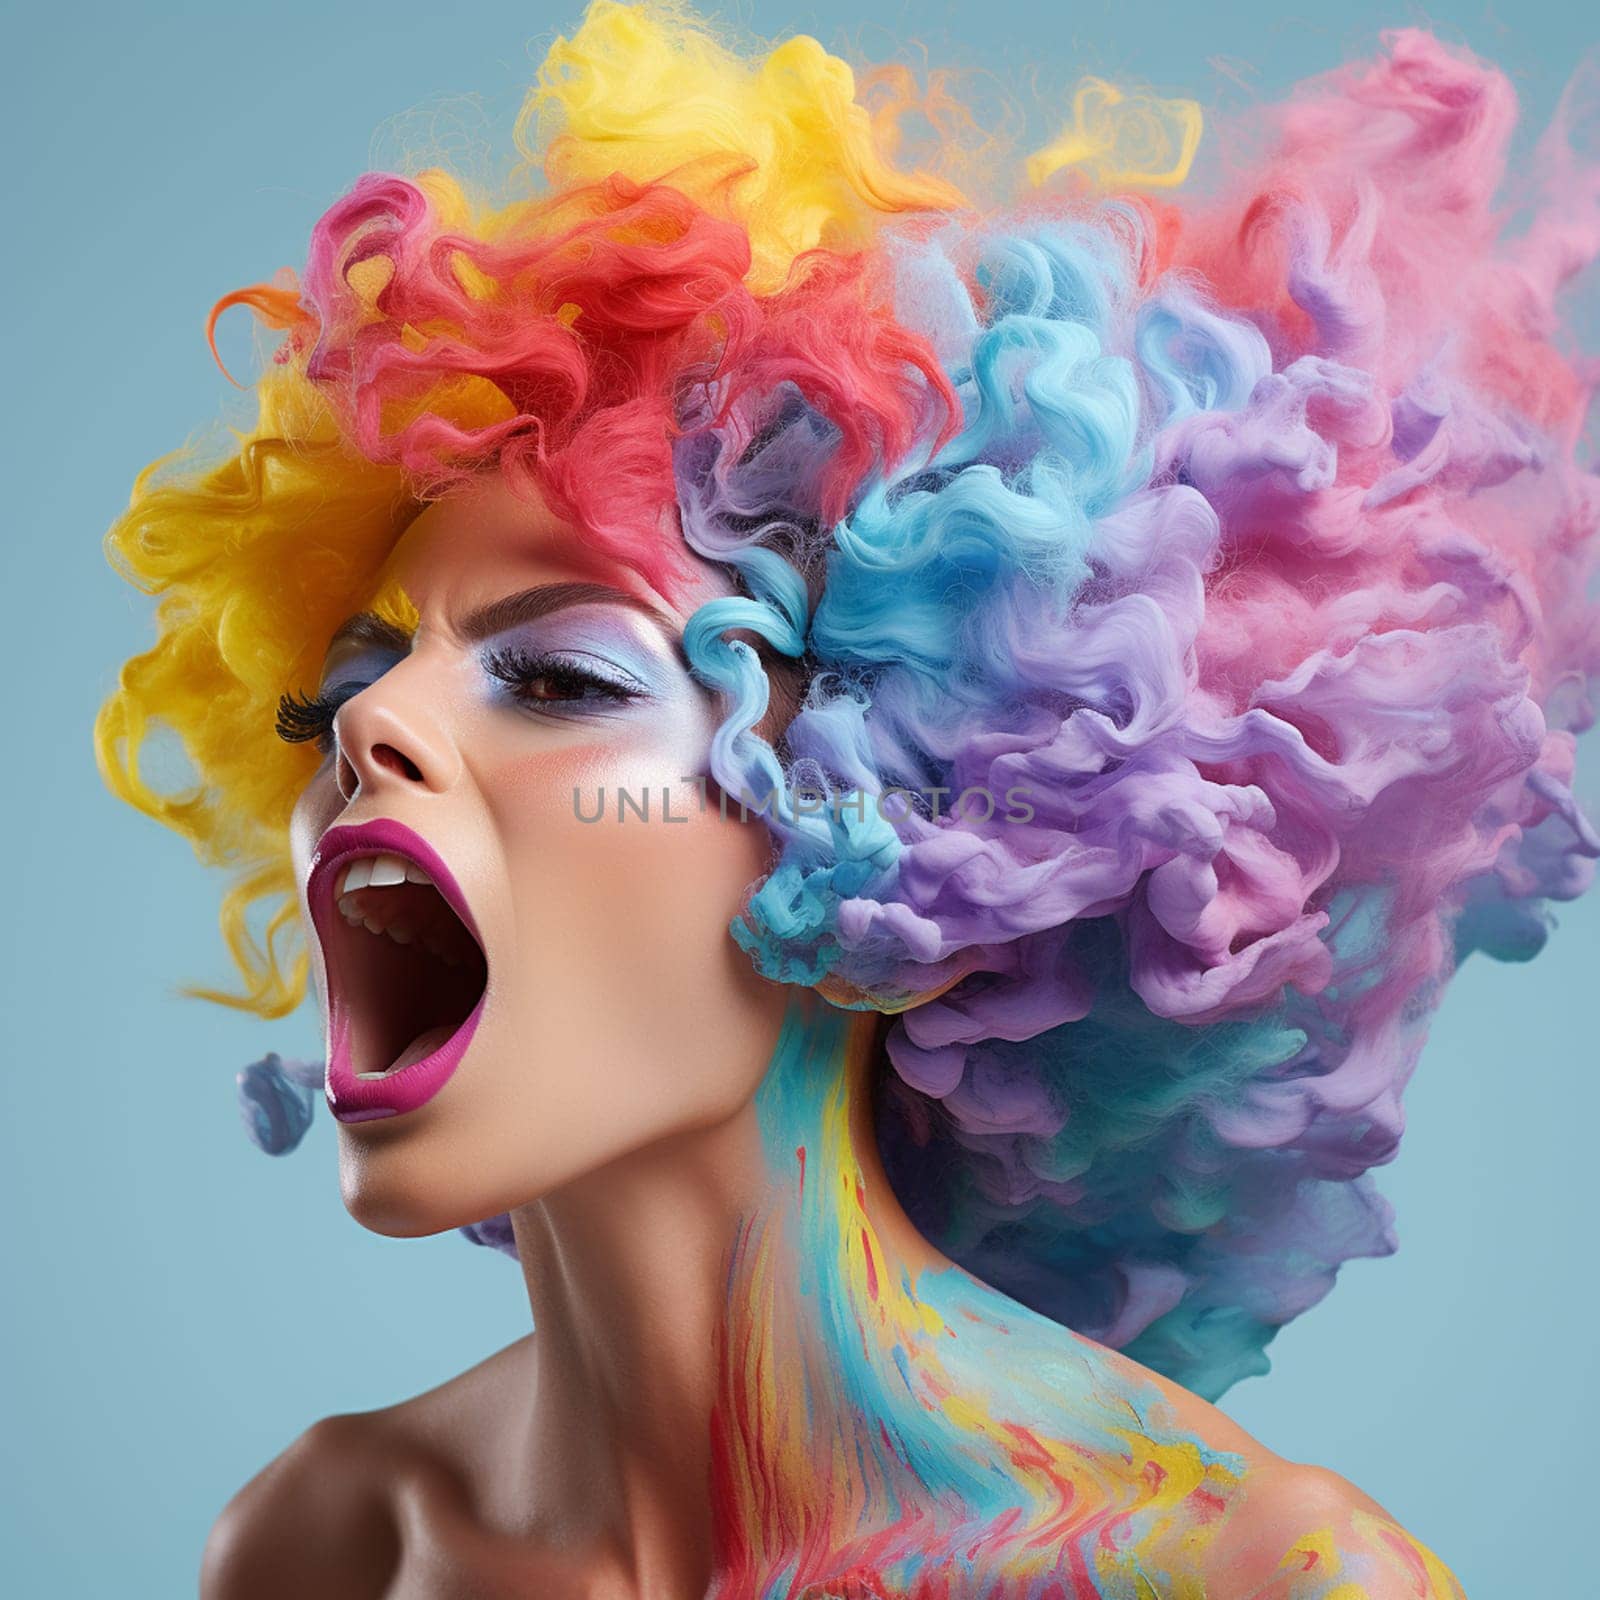 Woman in clown's wig making facing sticking out her tongue by Andelov13